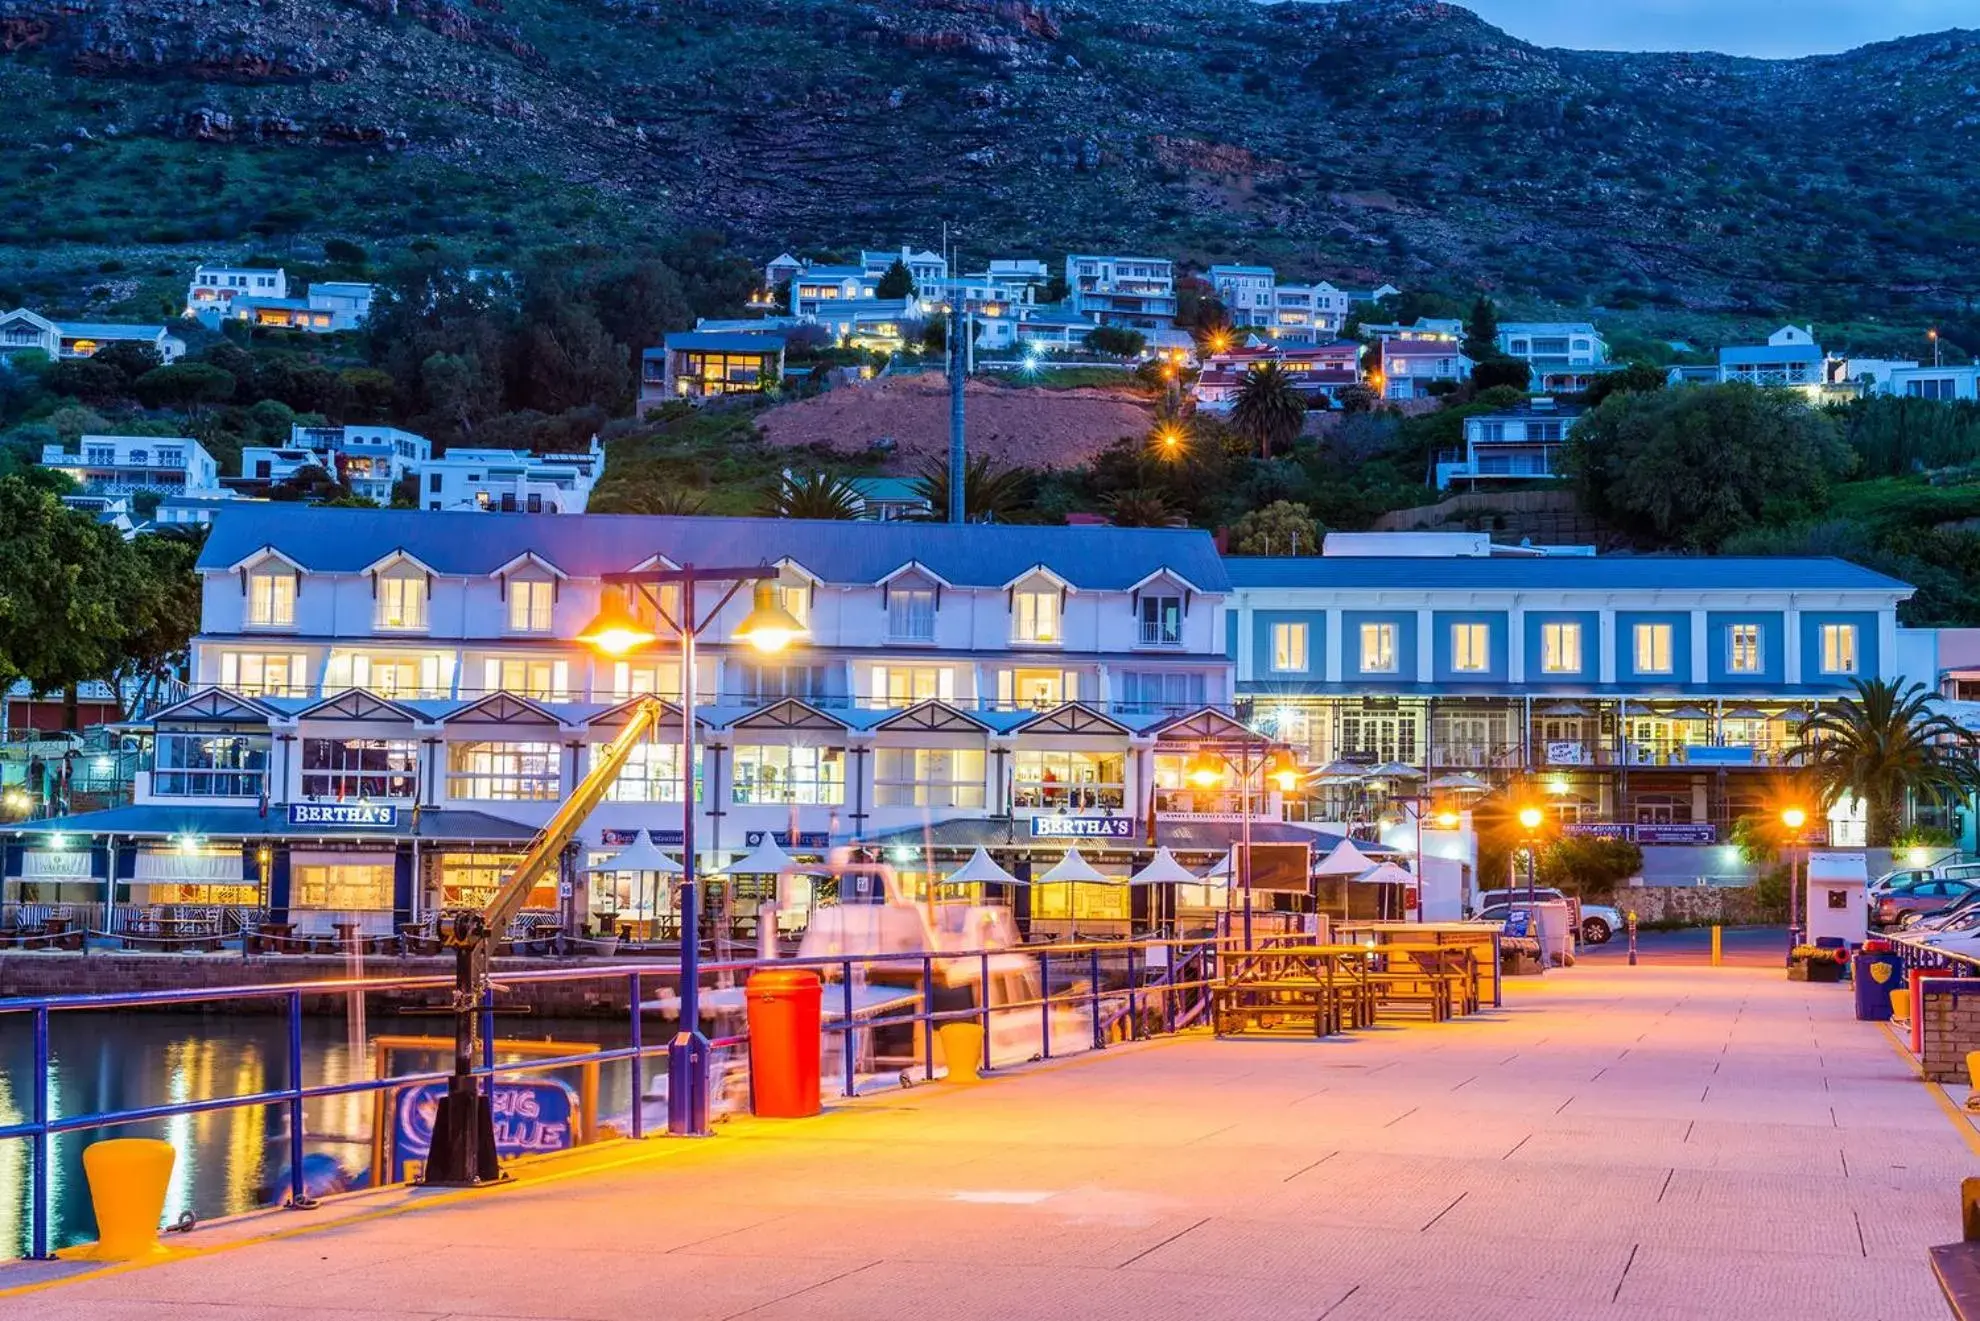 Property building in Simon's Town Quayside Hotel